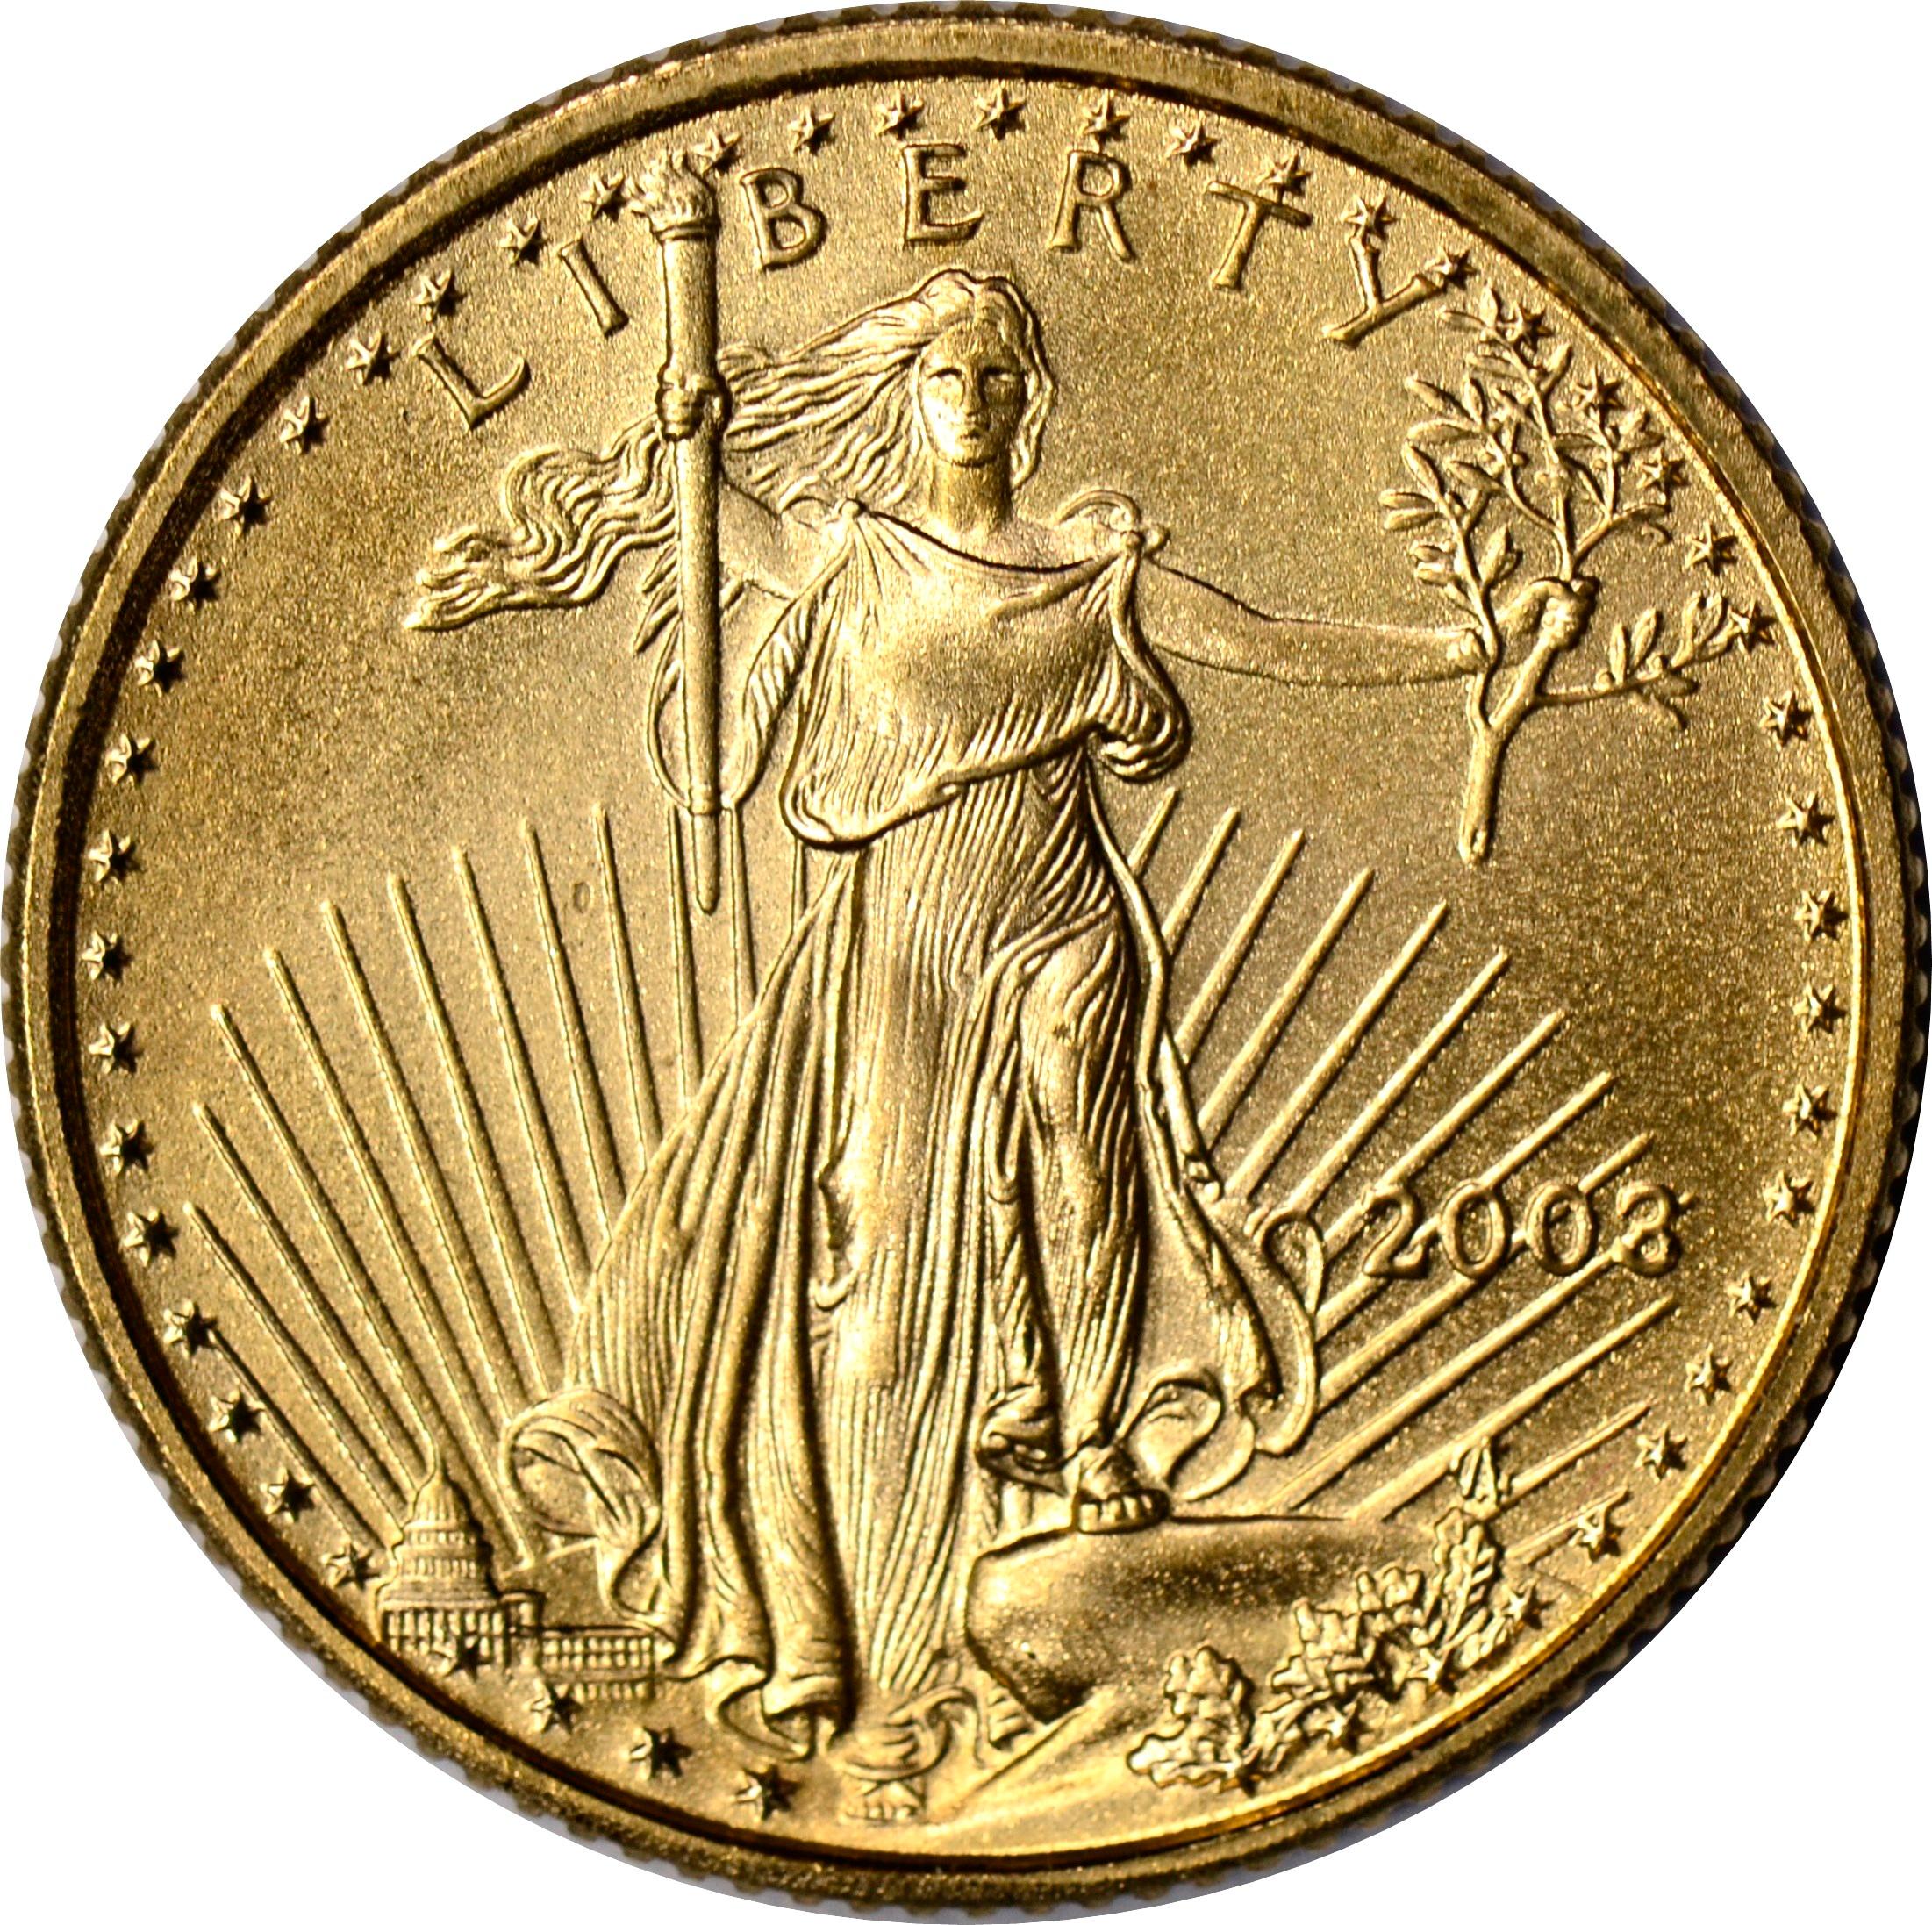 2003 $5 GOLD EAGLE - 1/10 TROY OUNCE FINE GOLD